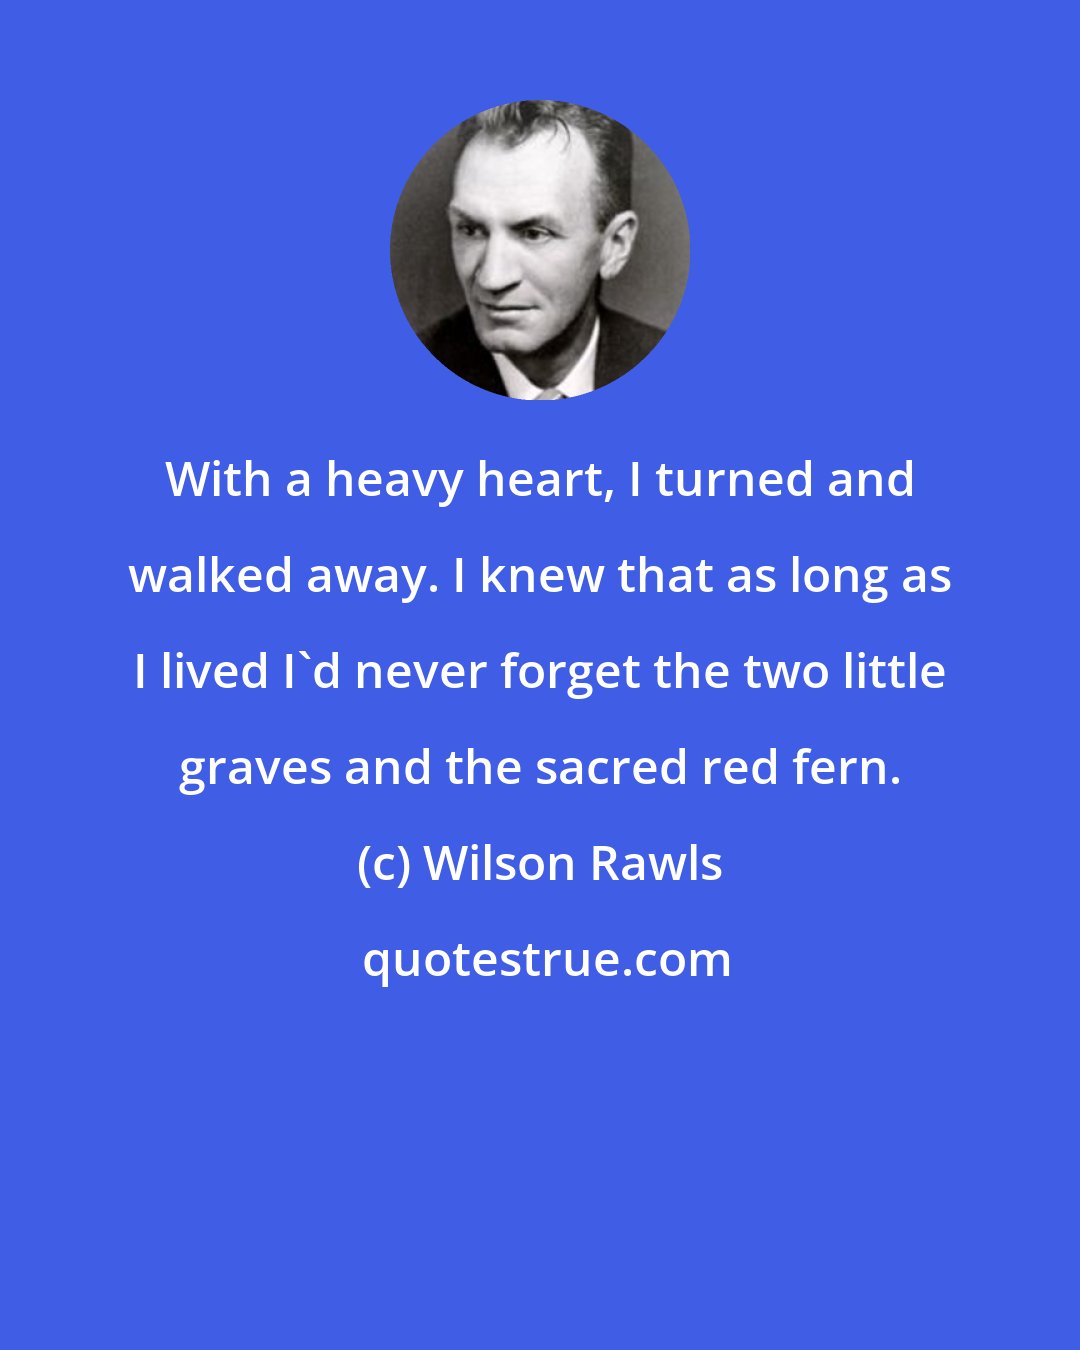 Wilson Rawls: With a heavy heart, I turned and walked away. I knew that as long as I lived I'd never forget the two little graves and the sacred red fern.